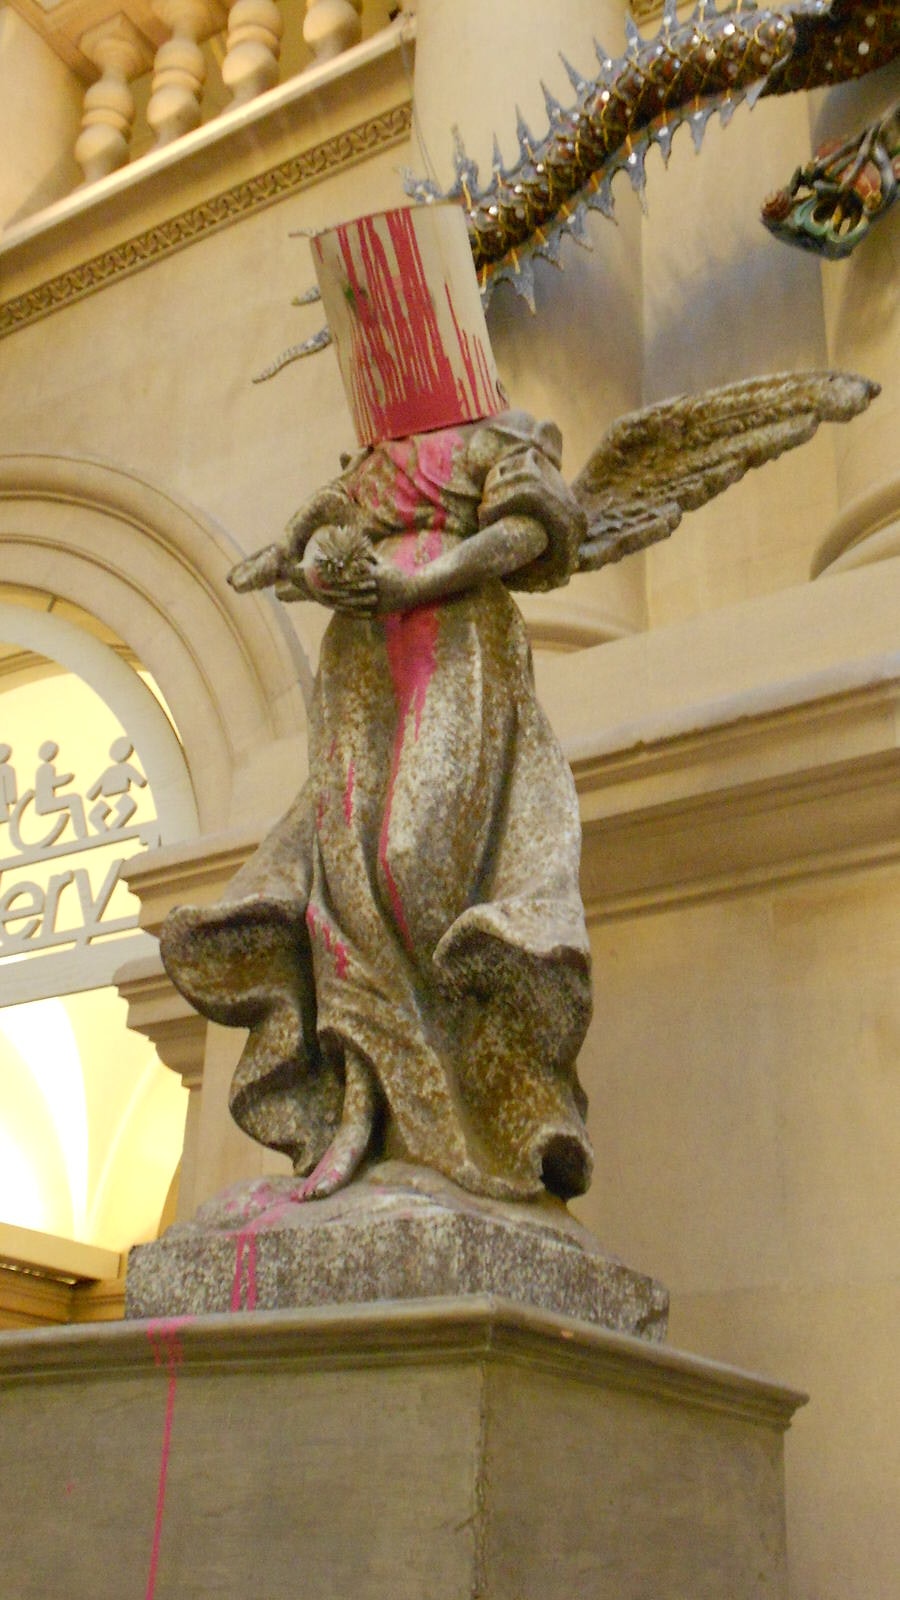 A sculpture by Banksy at Bristol Museum and Art Gallery; angel with a paint bucket on its head